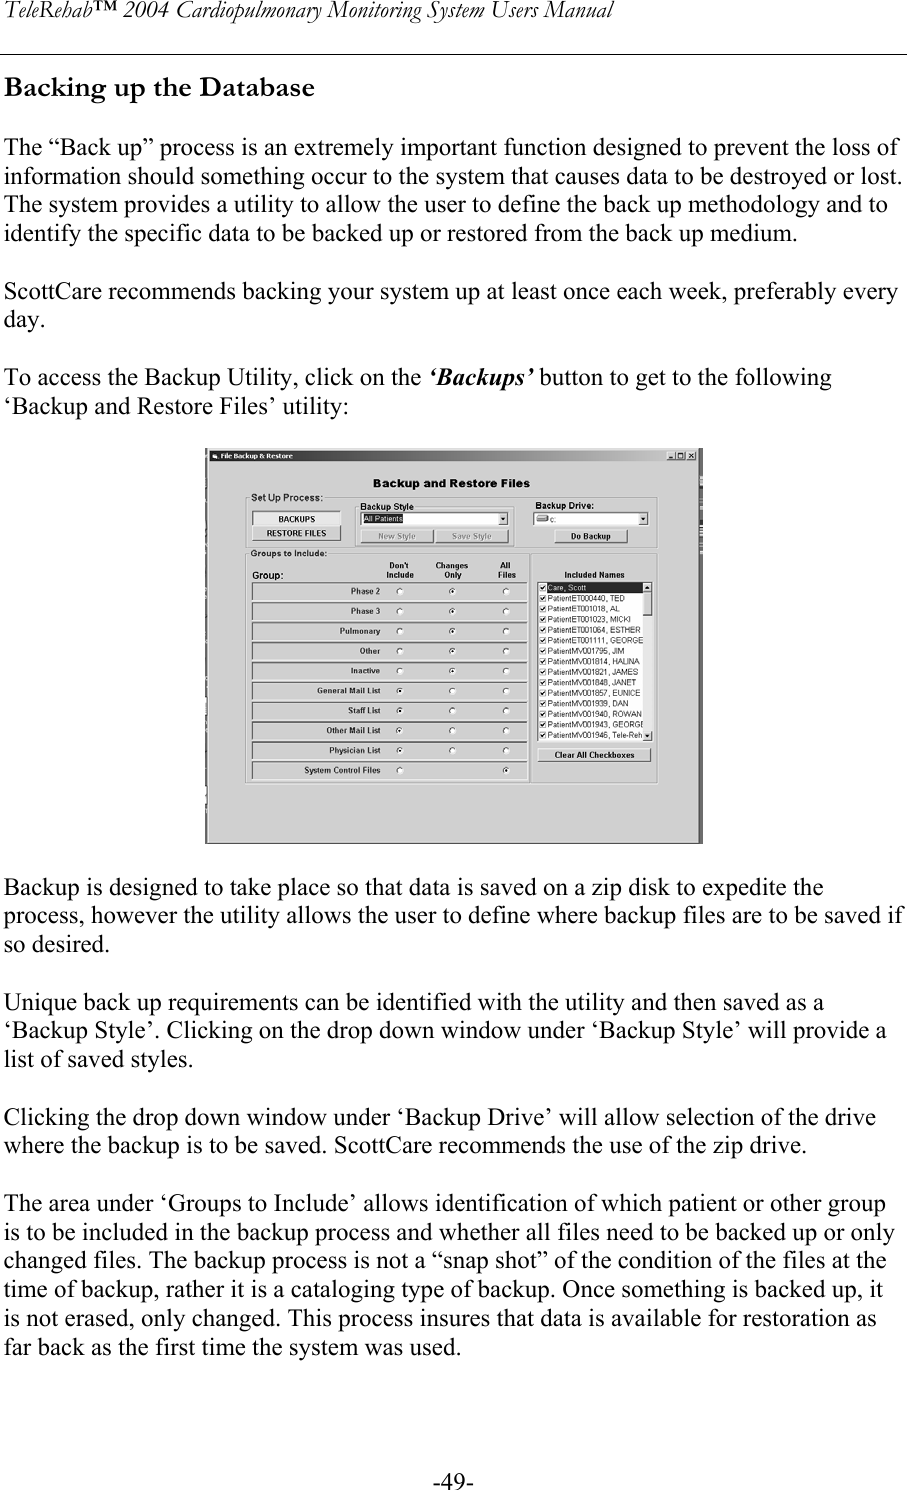 TeleRehab™ 2004 Cardiopulmonary Monitoring System Users Manual    -49-Backing up the Database  The “Back up” process is an extremely important function designed to prevent the loss of information should something occur to the system that causes data to be destroyed or lost. The system provides a utility to allow the user to define the back up methodology and to identify the specific data to be backed up or restored from the back up medium.  ScottCare recommends backing your system up at least once each week, preferably every day.  To access the Backup Utility, click on the ‘Backups’ button to get to the following ‘Backup and Restore Files’ utility:    Backup is designed to take place so that data is saved on a zip disk to expedite the process, however the utility allows the user to define where backup files are to be saved if so desired.  Unique back up requirements can be identified with the utility and then saved as a ‘Backup Style’. Clicking on the drop down window under ‘Backup Style’ will provide a list of saved styles.  Clicking the drop down window under ‘Backup Drive’ will allow selection of the drive where the backup is to be saved. ScottCare recommends the use of the zip drive.  The area under ‘Groups to Include’ allows identification of which patient or other group is to be included in the backup process and whether all files need to be backed up or only changed files. The backup process is not a “snap shot” of the condition of the files at the time of backup, rather it is a cataloging type of backup. Once something is backed up, it is not erased, only changed. This process insures that data is available for restoration as far back as the first time the system was used.   